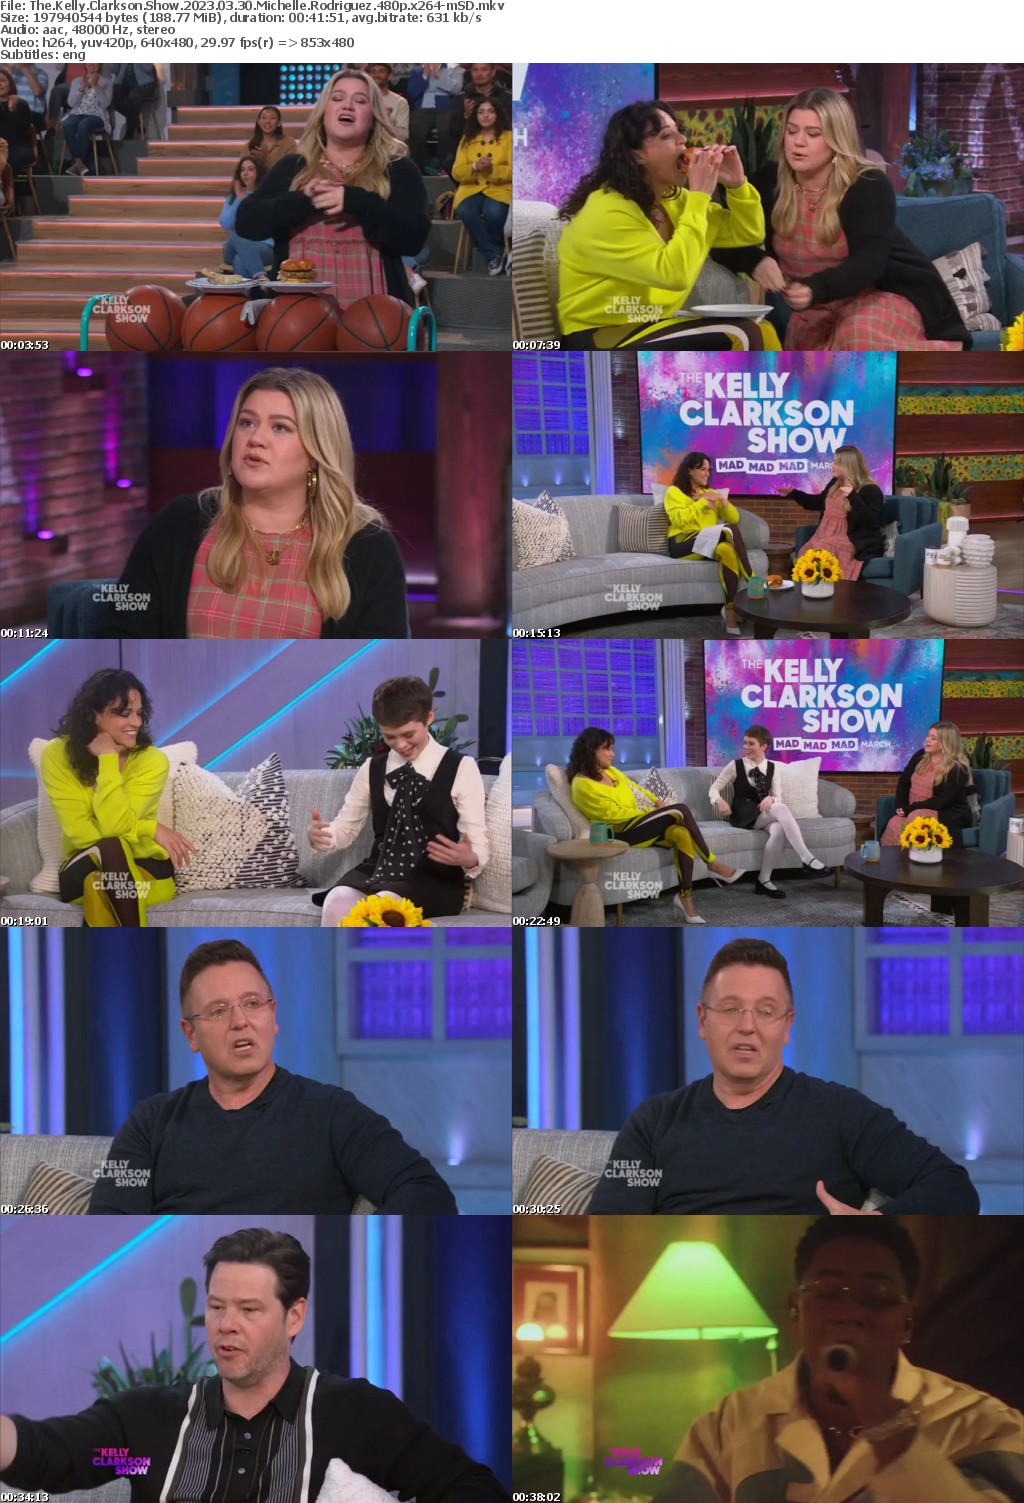 The Kelly Clarkson Show 2023 03 30 Michelle Rodriguez 480p x264-mSD